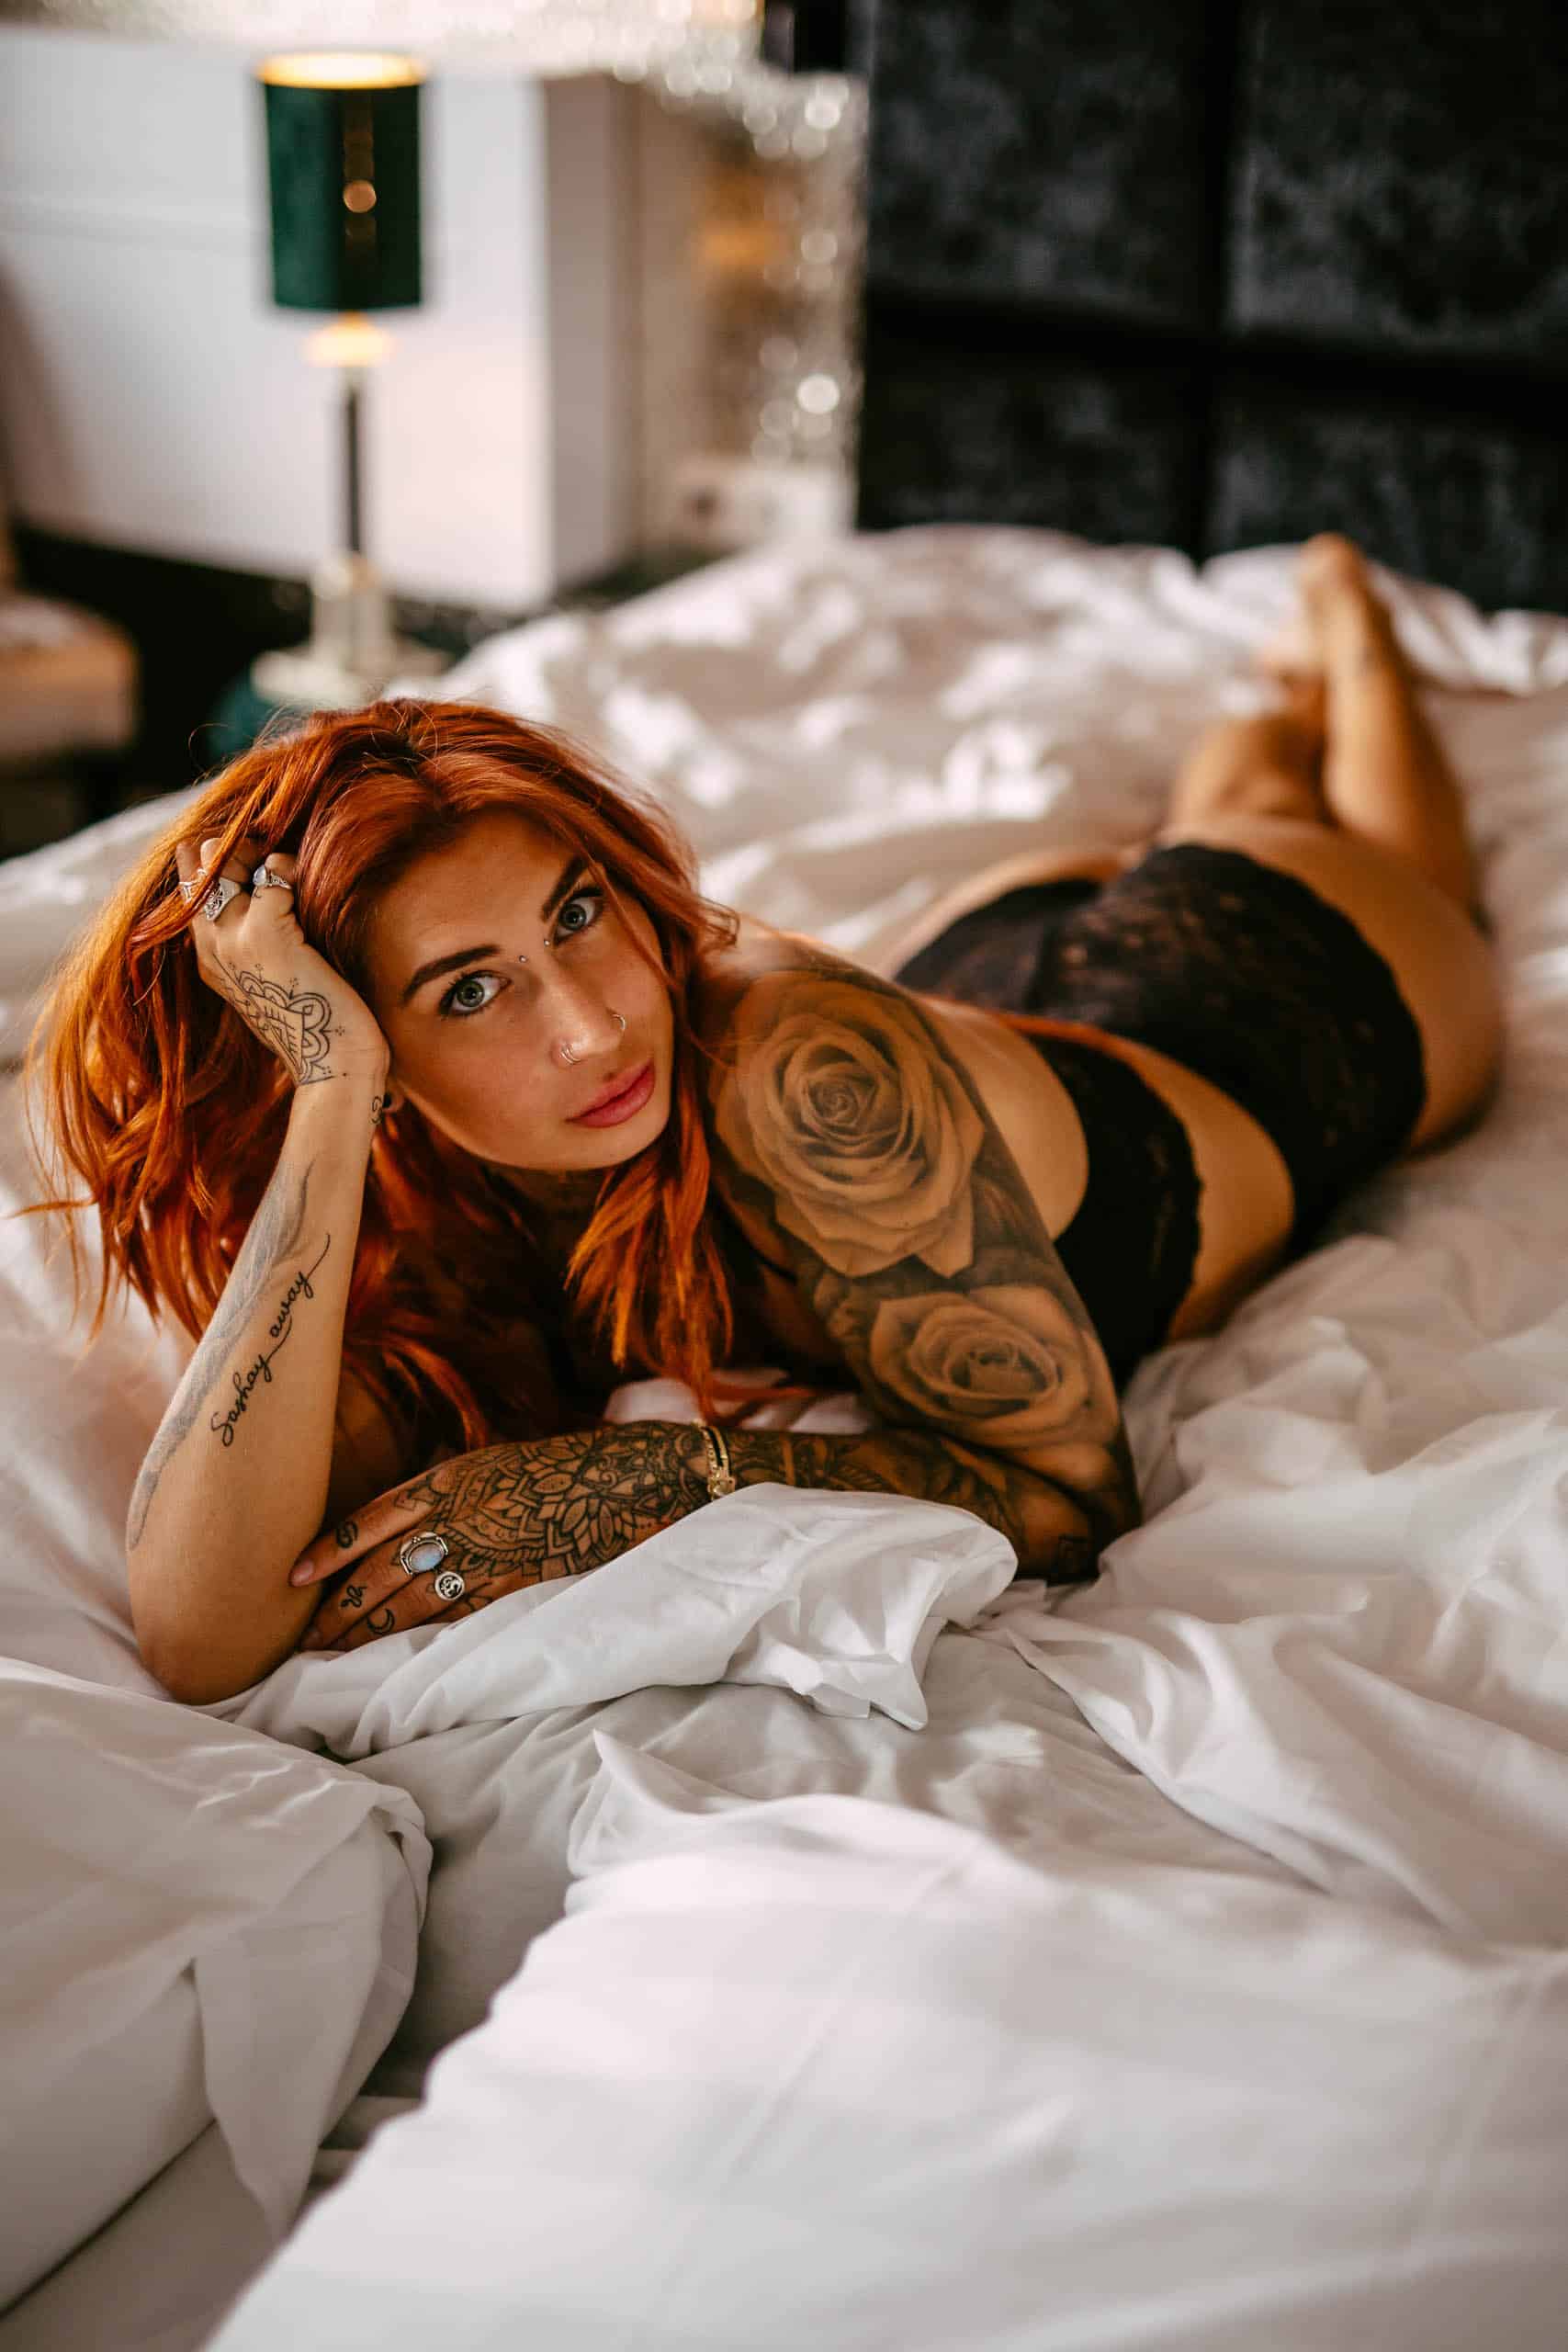 A woman with red hair and tattoos poses sensually on a bed during a captivating boudoir shoot in Hoek van Holland.